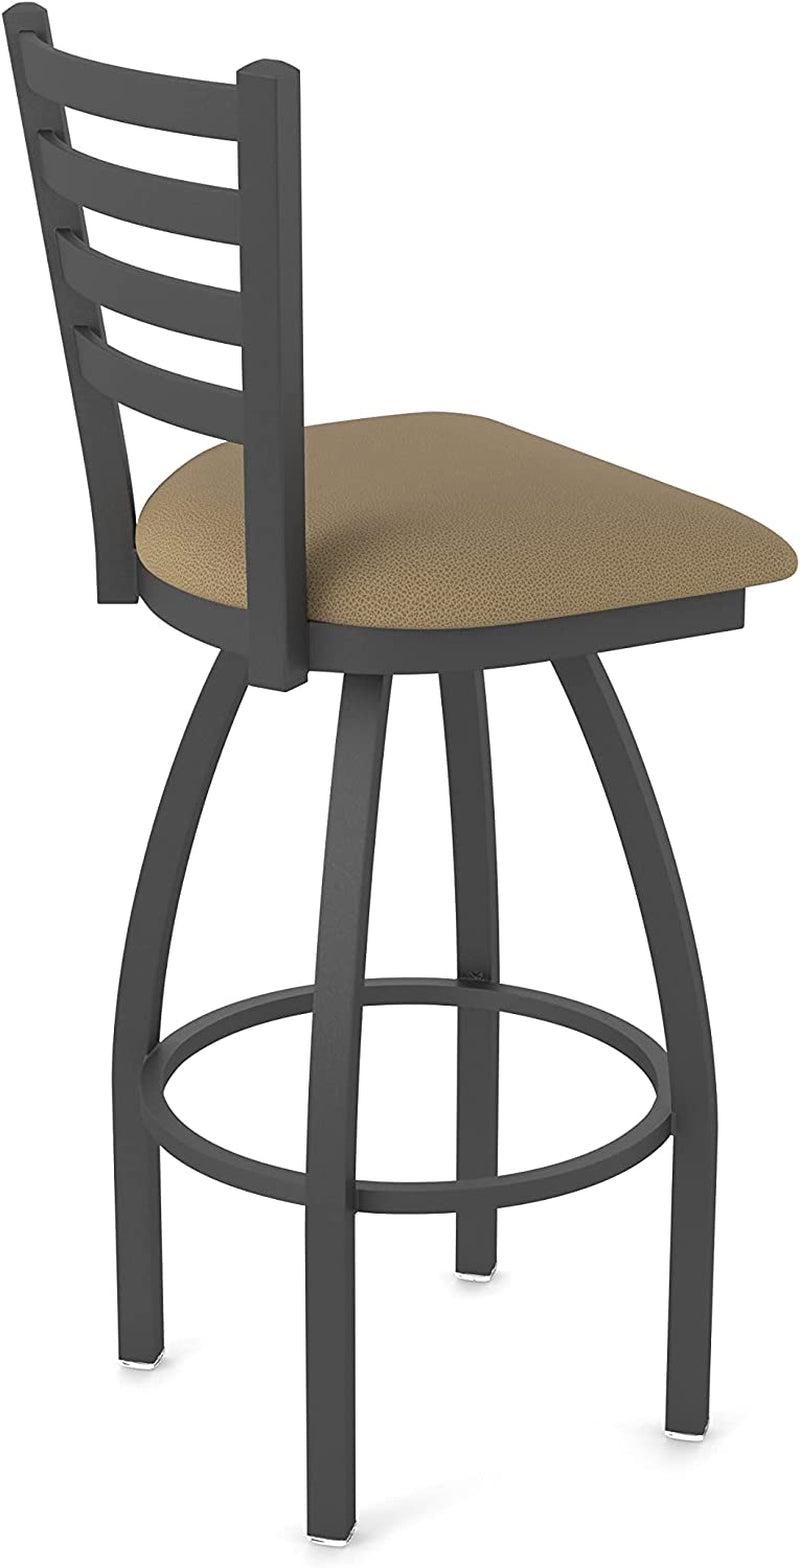 410 Jackie 30" Swivel Bar Stool with Pewter Finish and Canter Thatch Seat